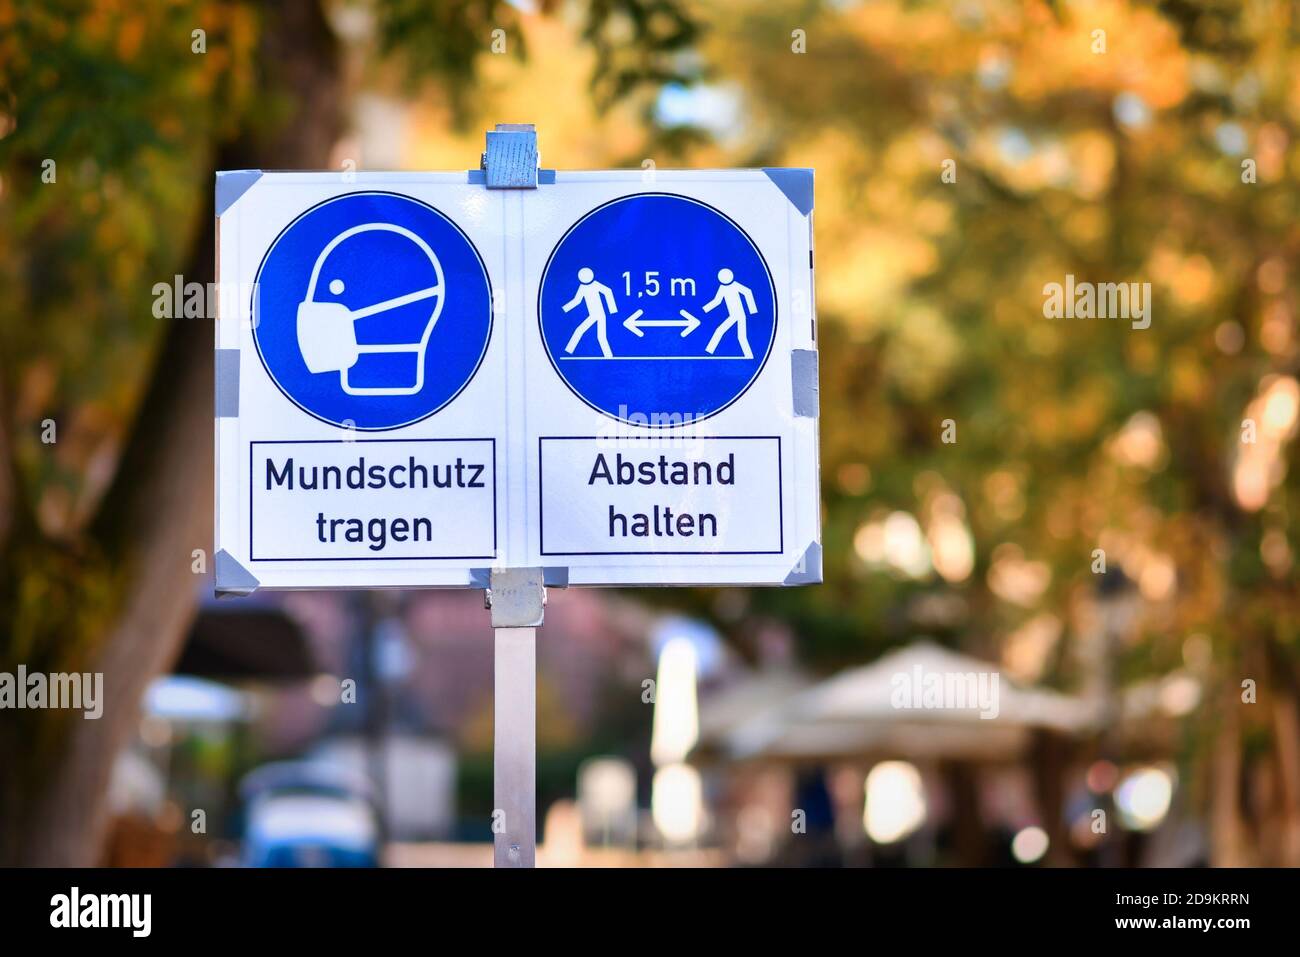 Signs for face mask and distance requirement in German city center with text saying 'wear face mask' and 'keep distance' Stock Photo